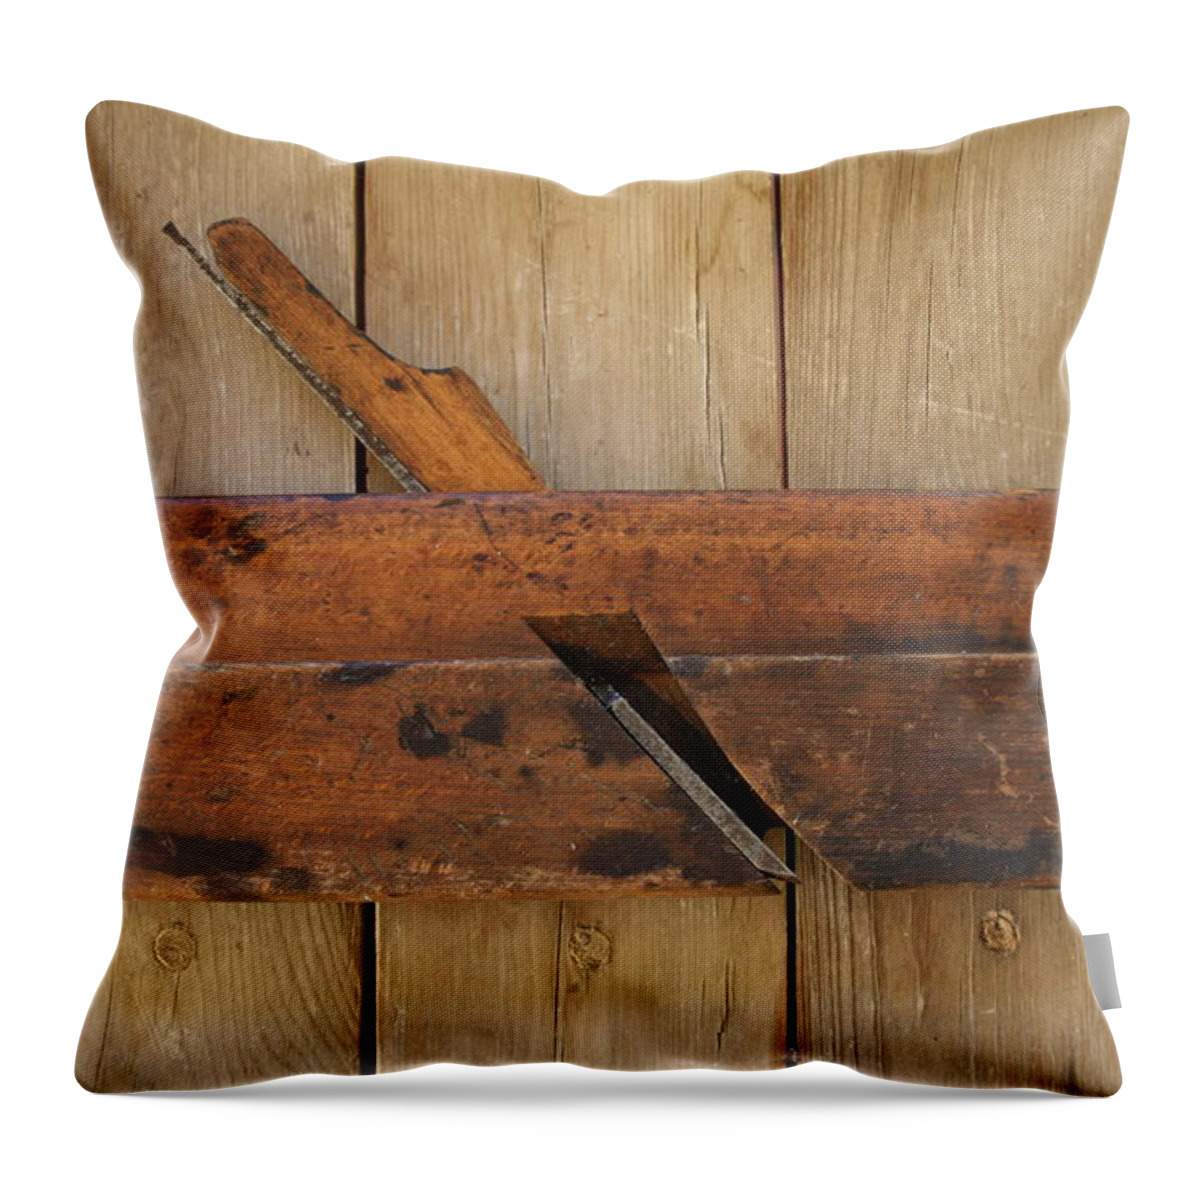 Tool Throw Pillow featuring the photograph Wood Molding Plane 2 by Marna Edwards Flavell